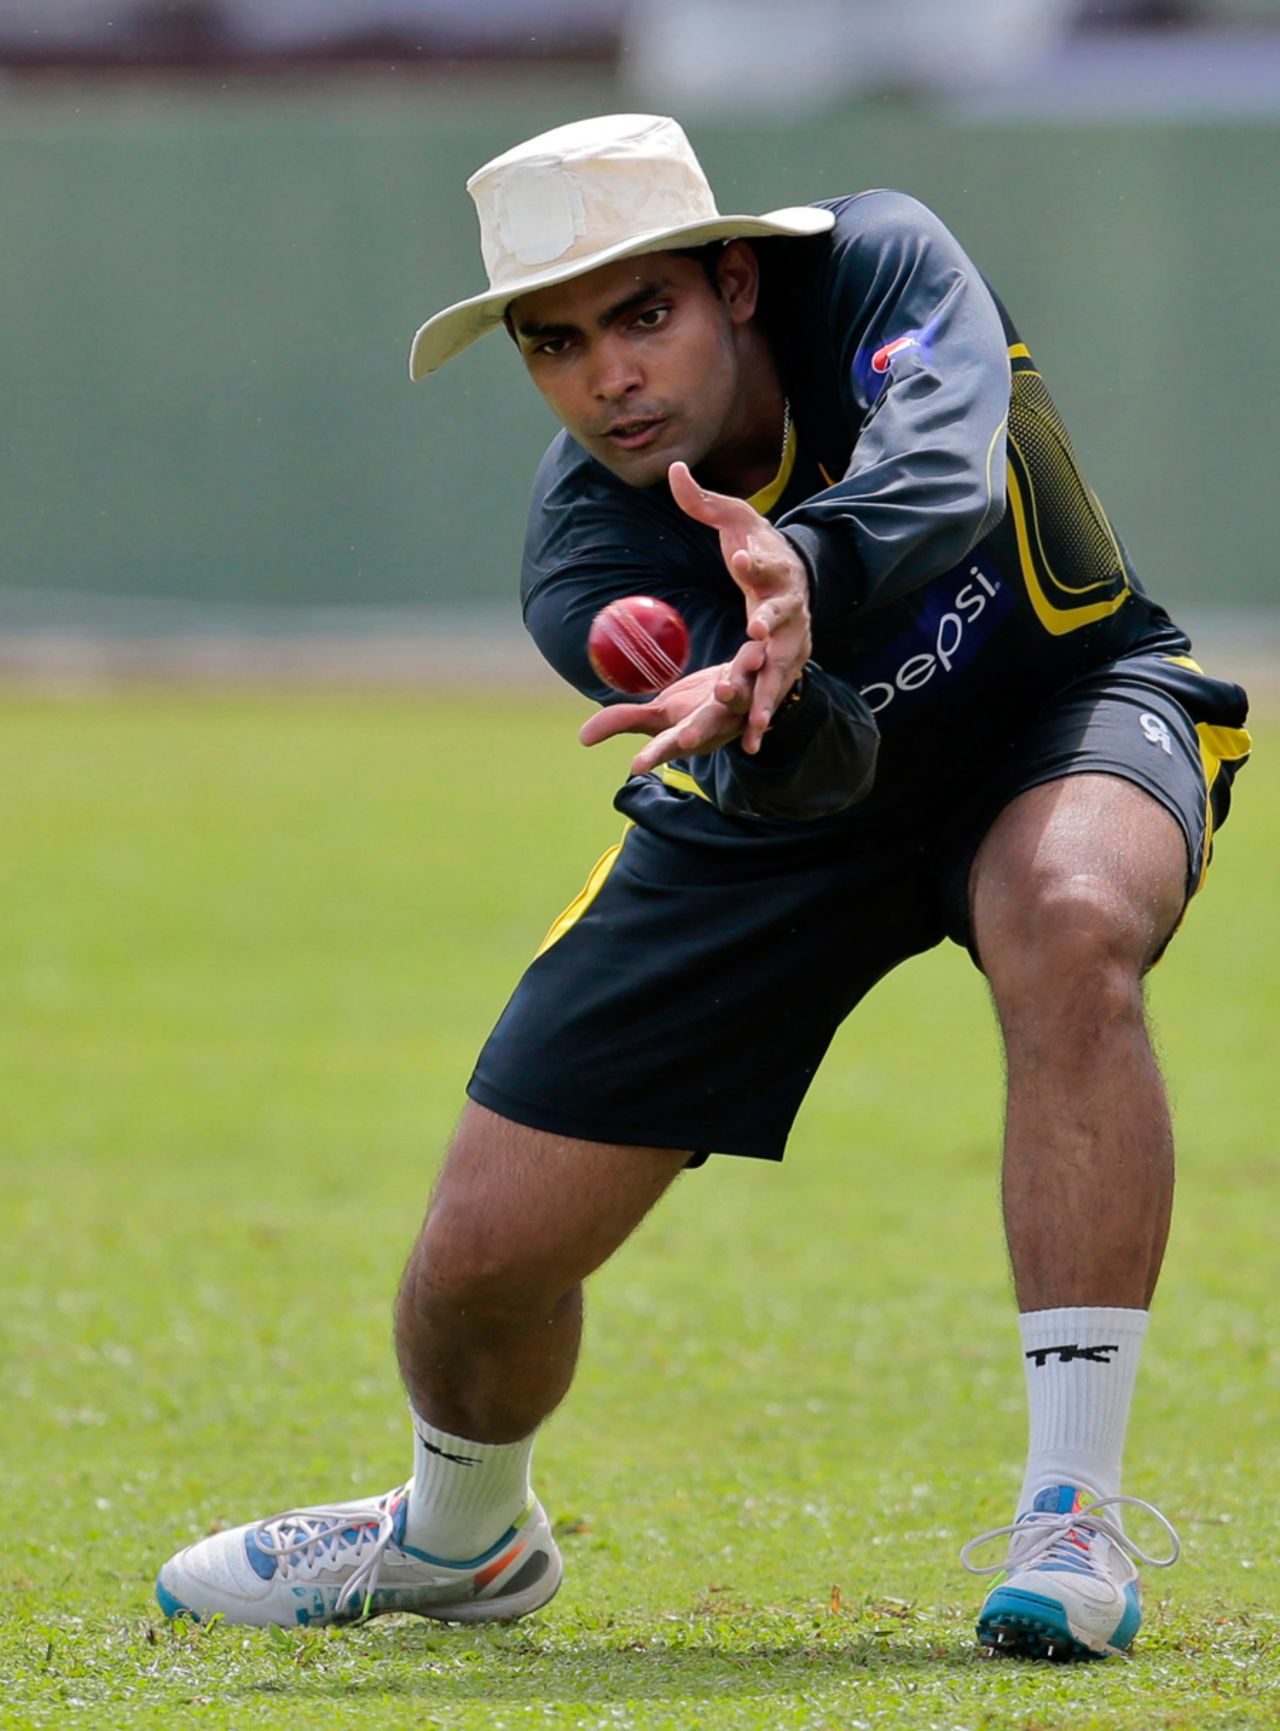 Umar Akmal participates in a fielding drill, Galle, August 5, 2014